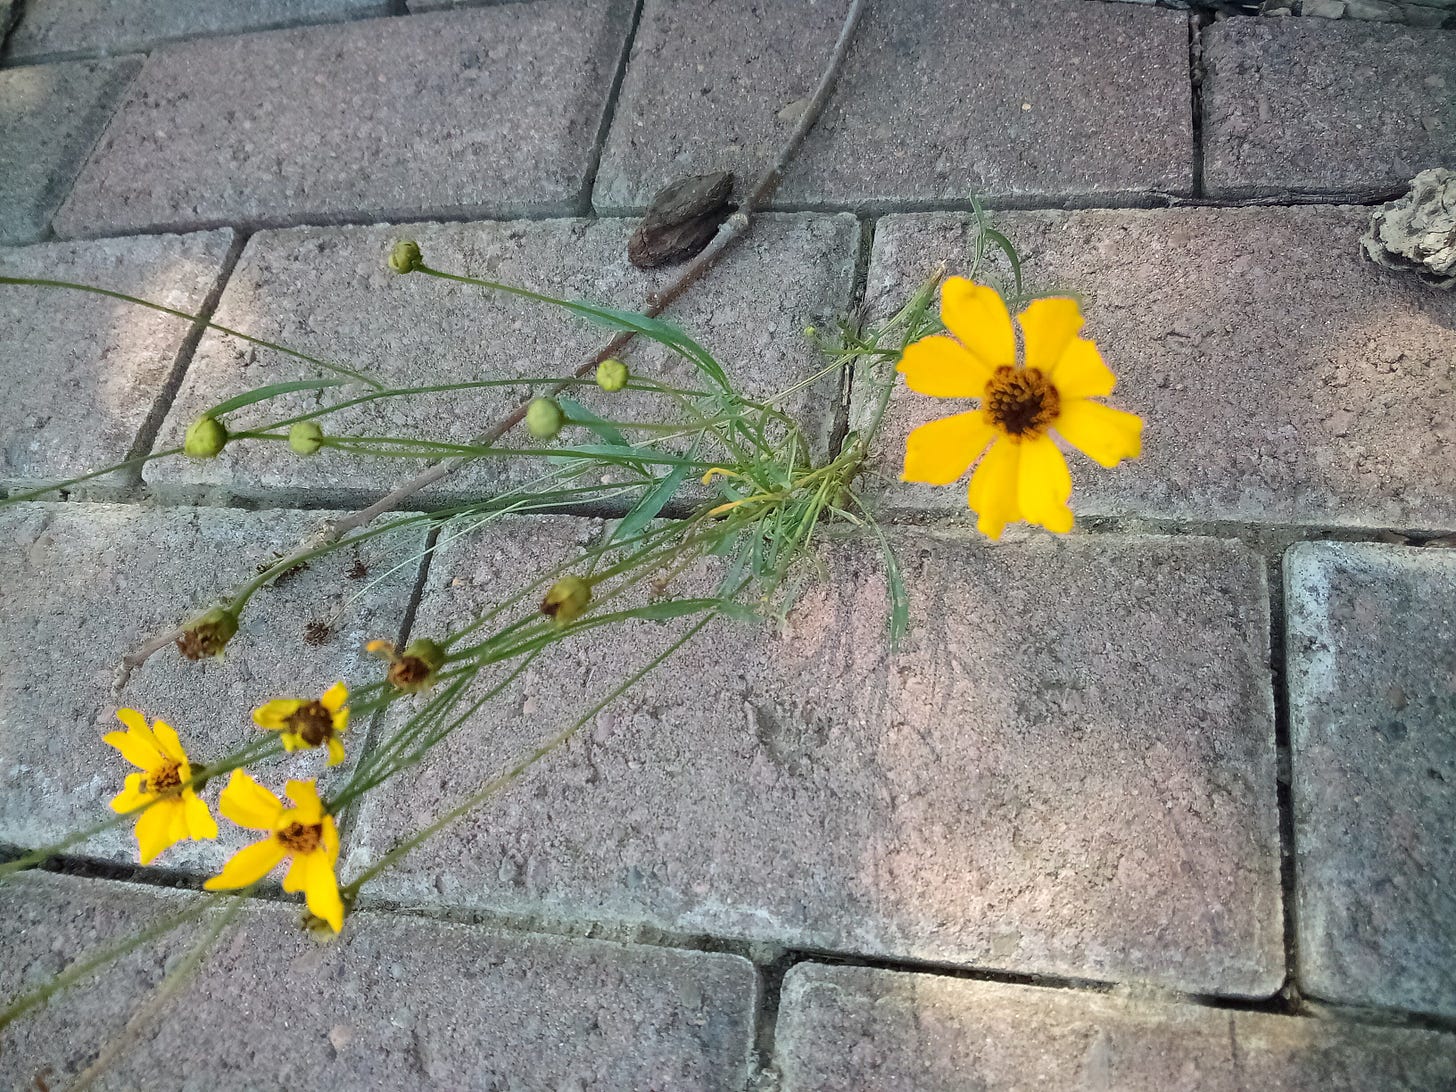 Yellow flower growing out of pavement